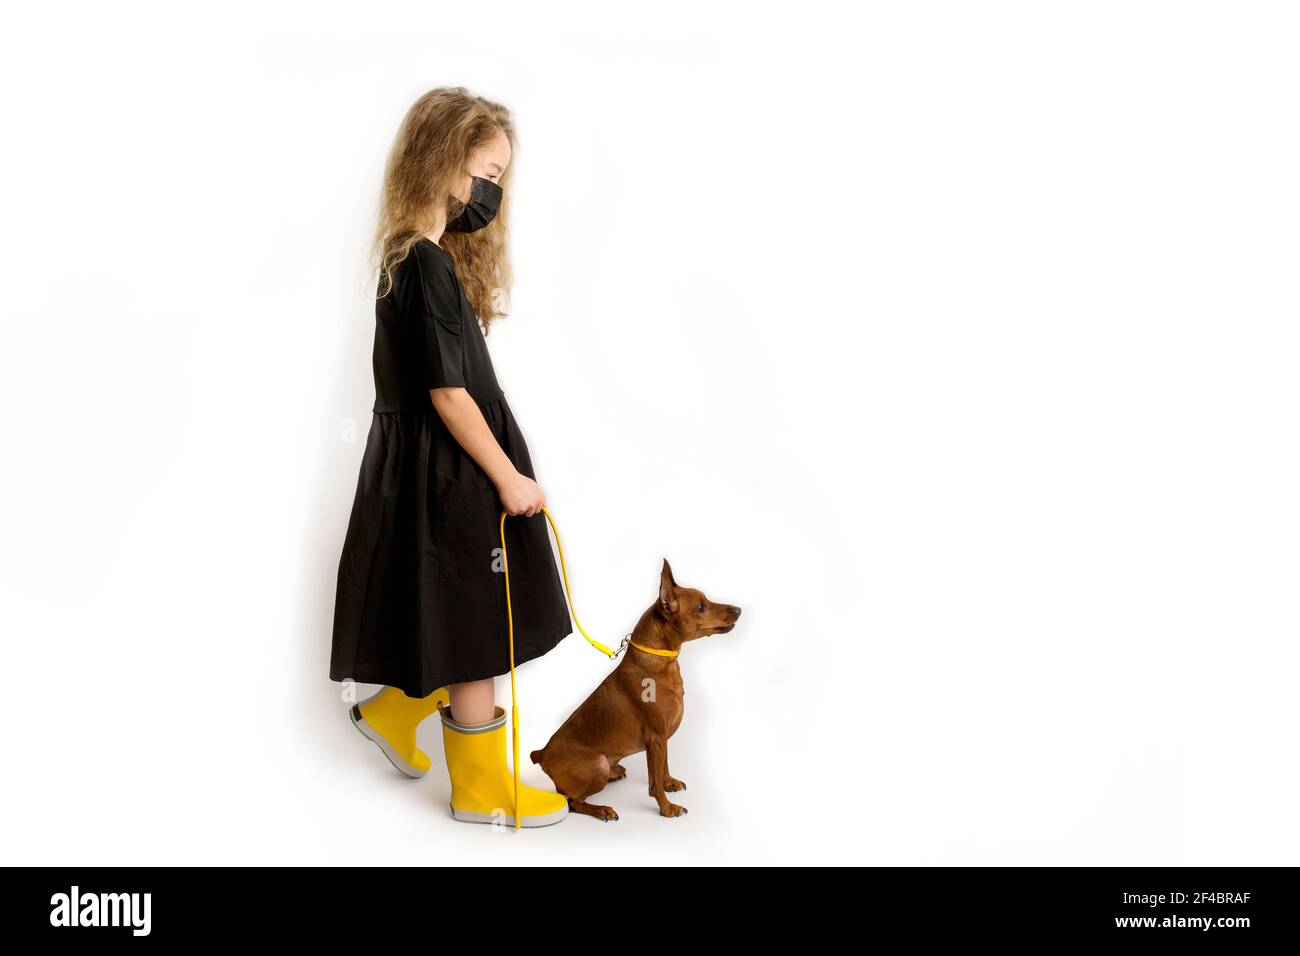 A girl in a black protective antiviral mask walks the dog. New reality of life during the COVID-19 pandemic. Stock Photo